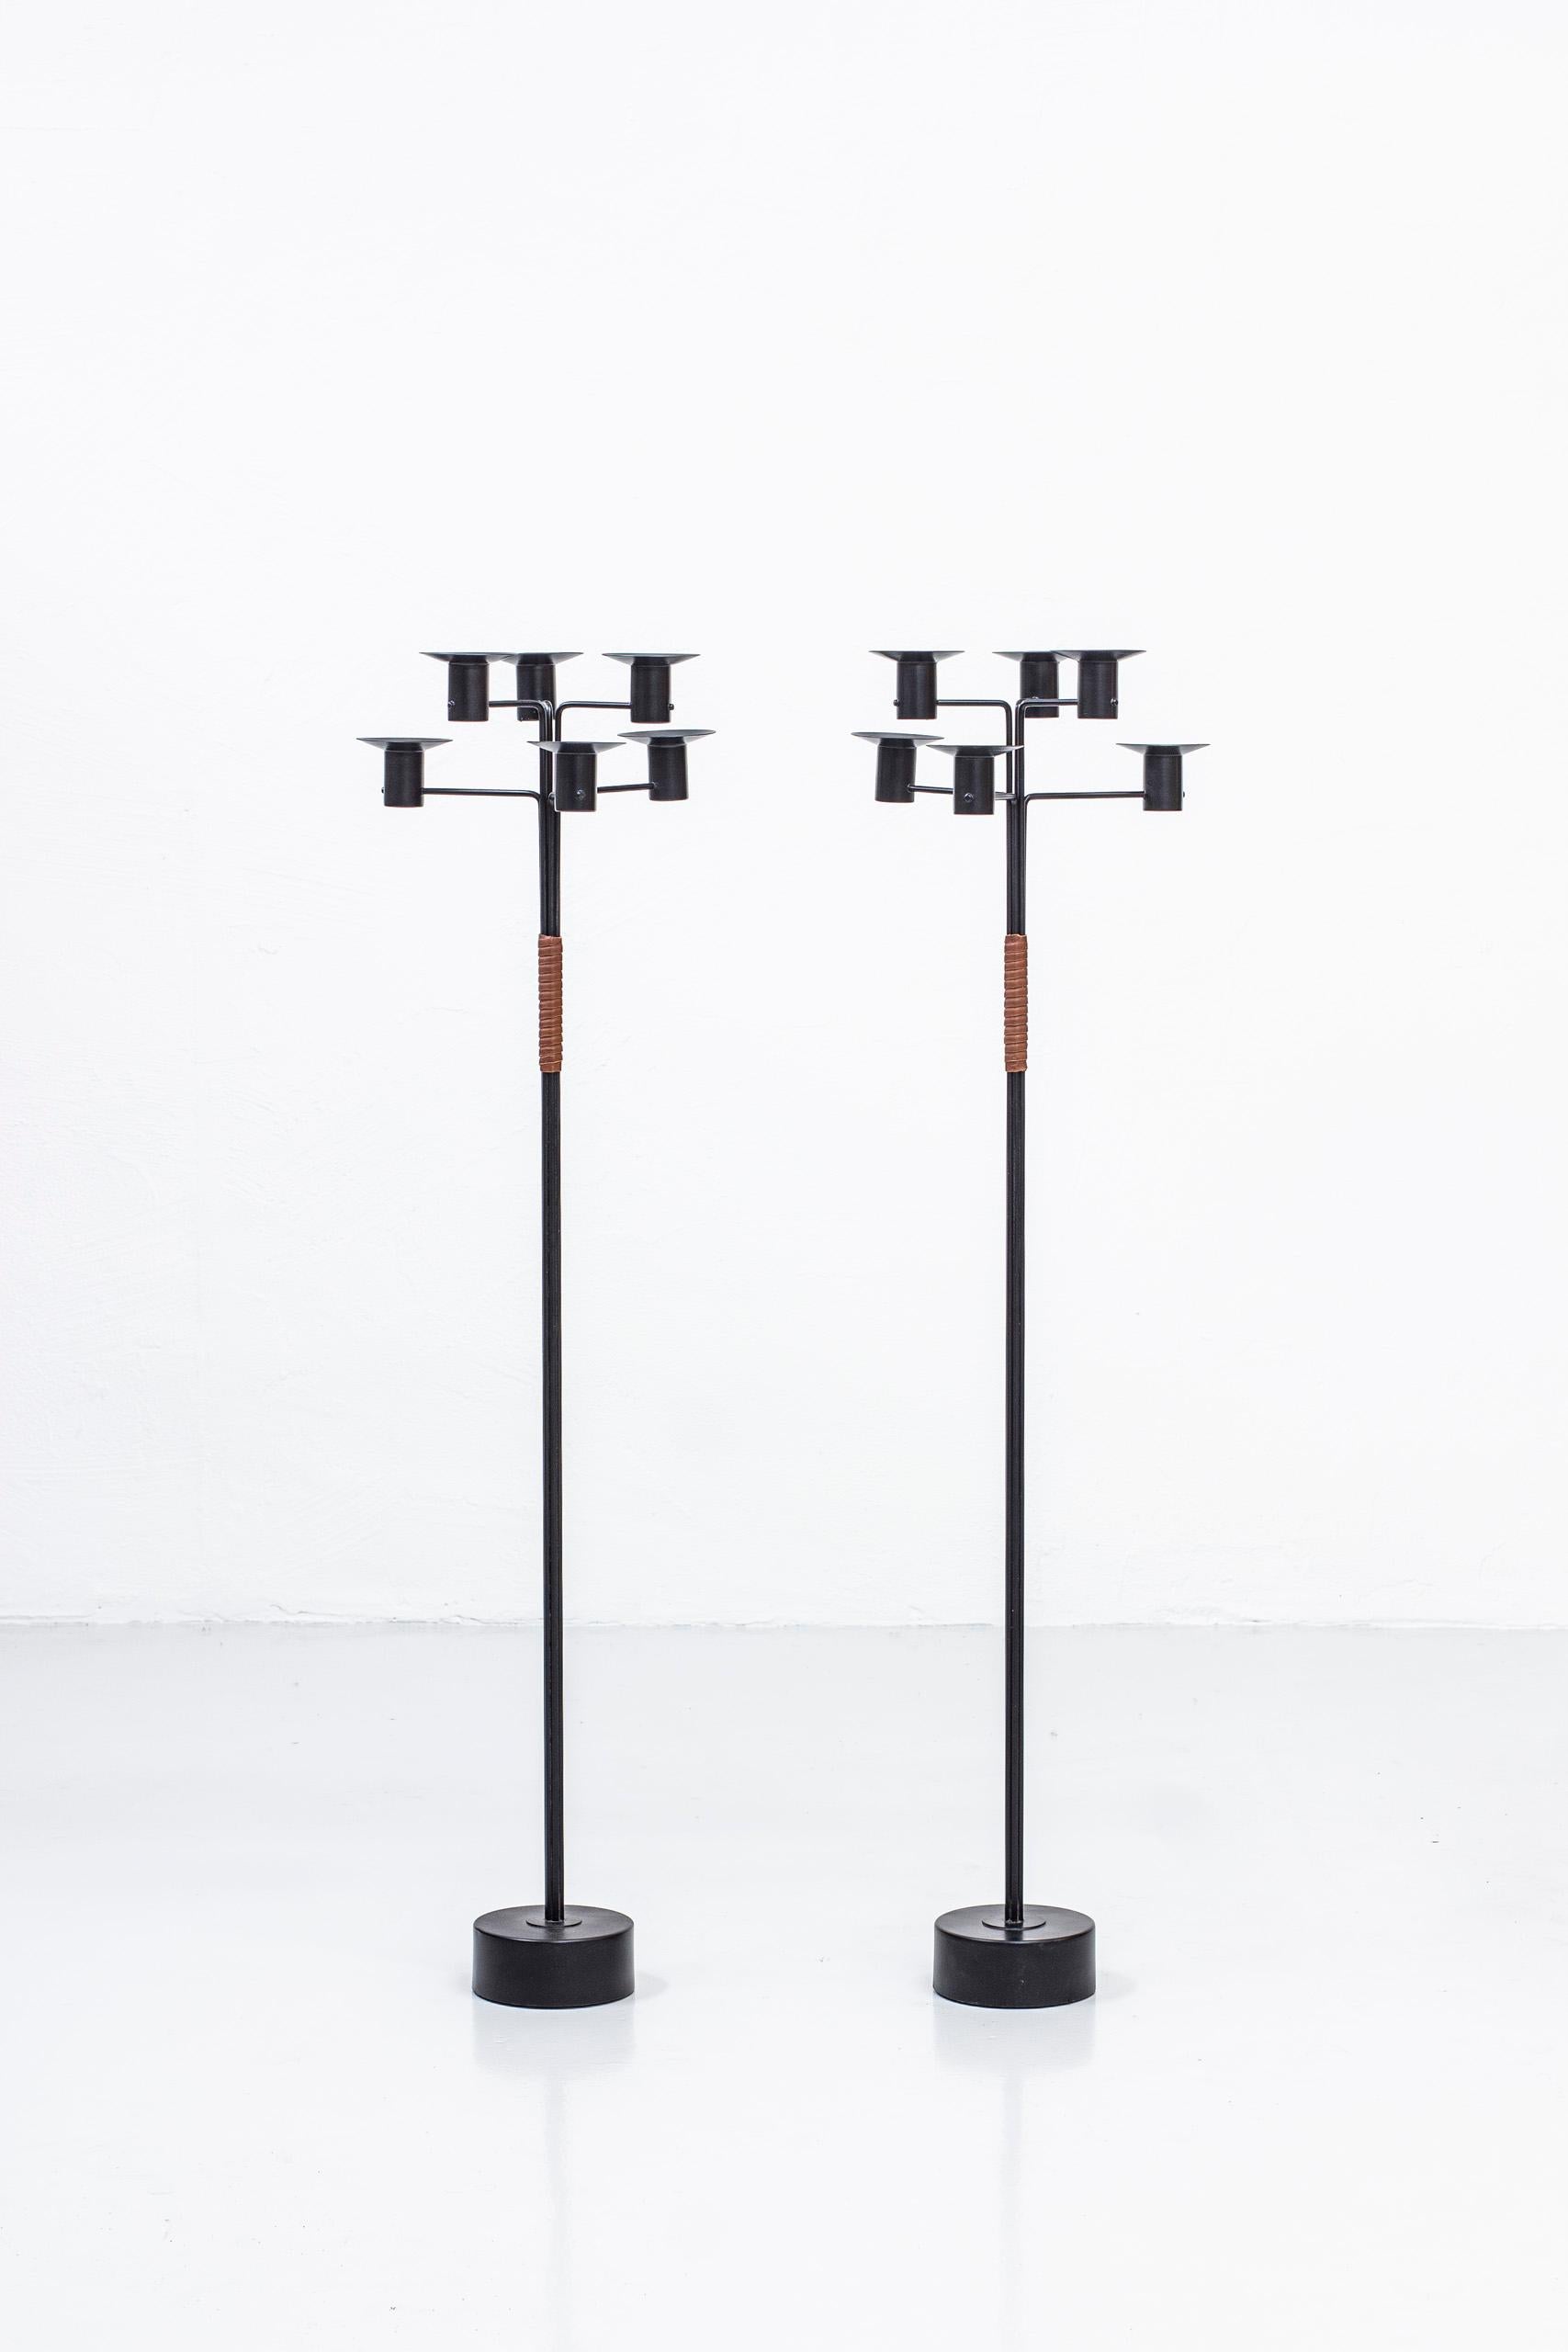 Pair of candelabras designed by Hans-Agne Jakobsson. Produced by his own company in Markaryd, Sweden during the 1950s. Made from black lacquered steel and leather. Very good condition with light age related wear and patina.


Price for the pair.